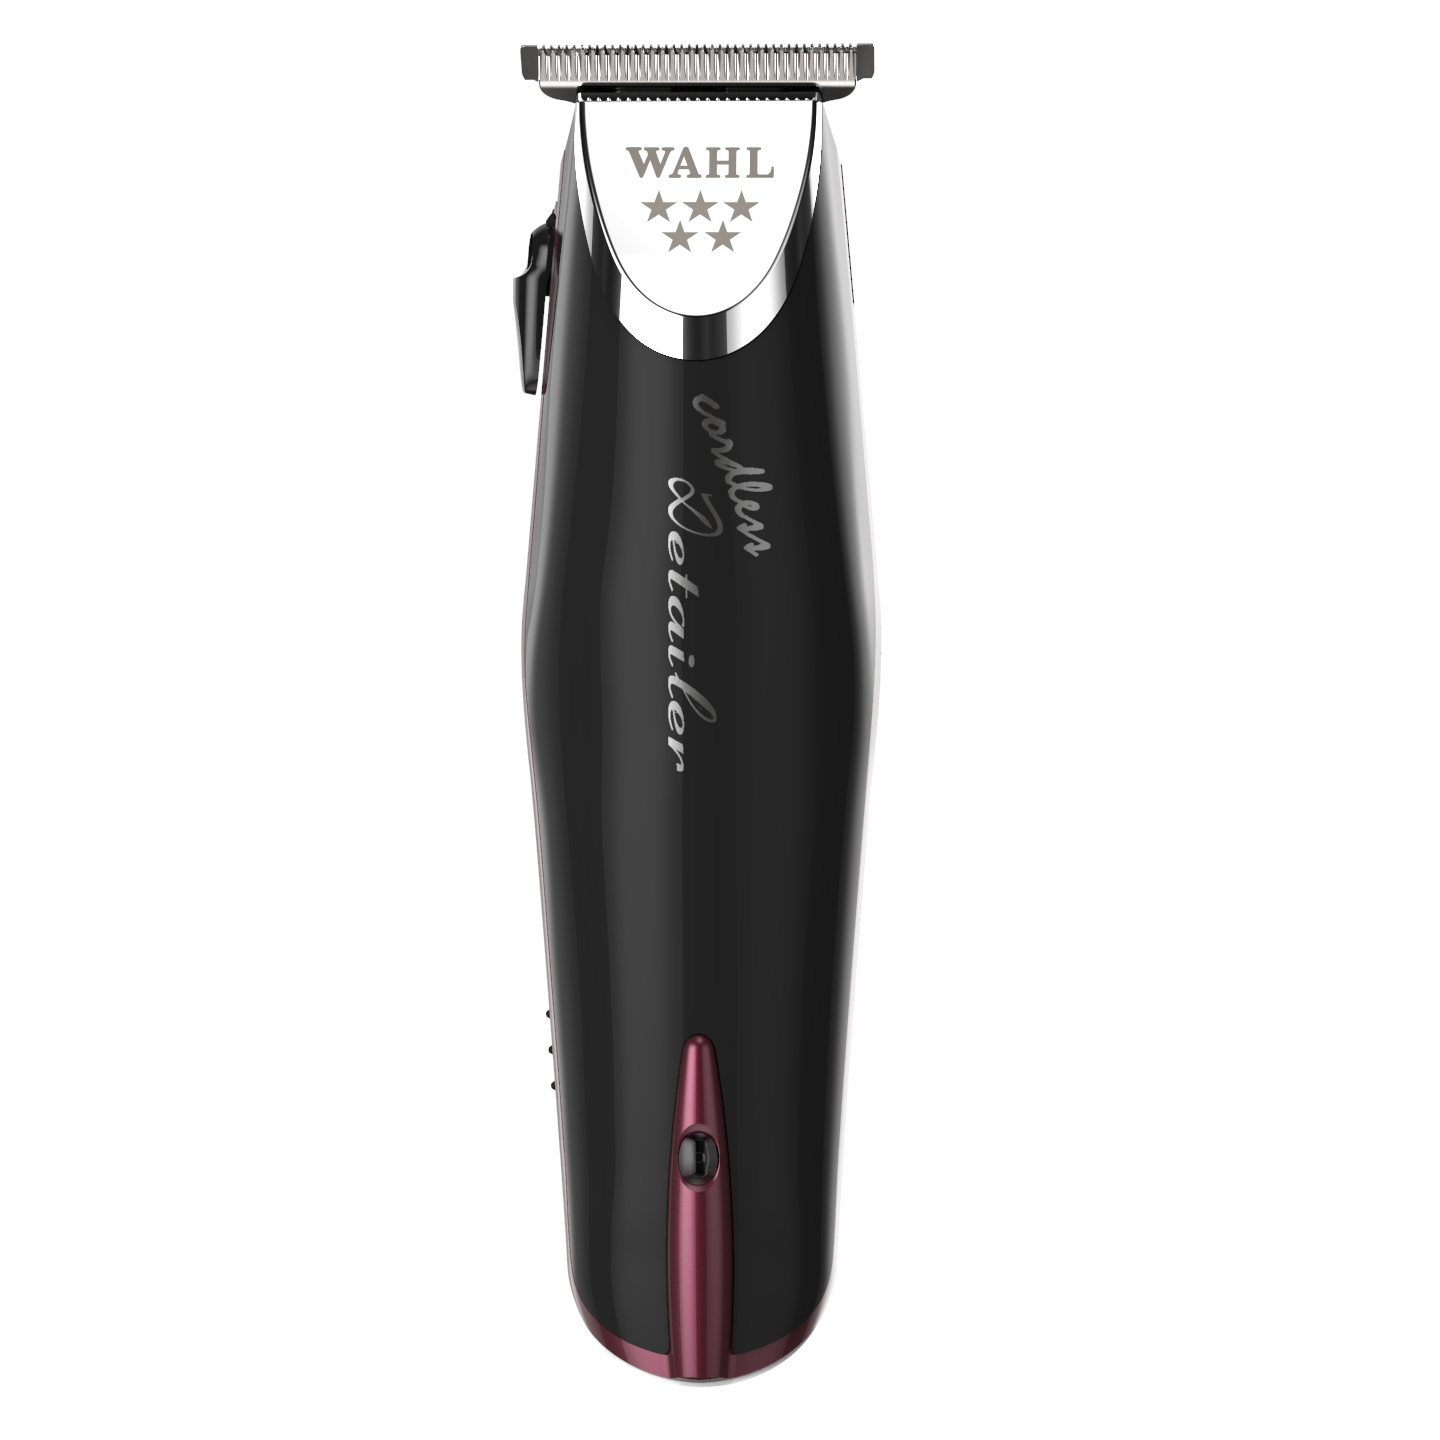 wahl cordless detailer clippers